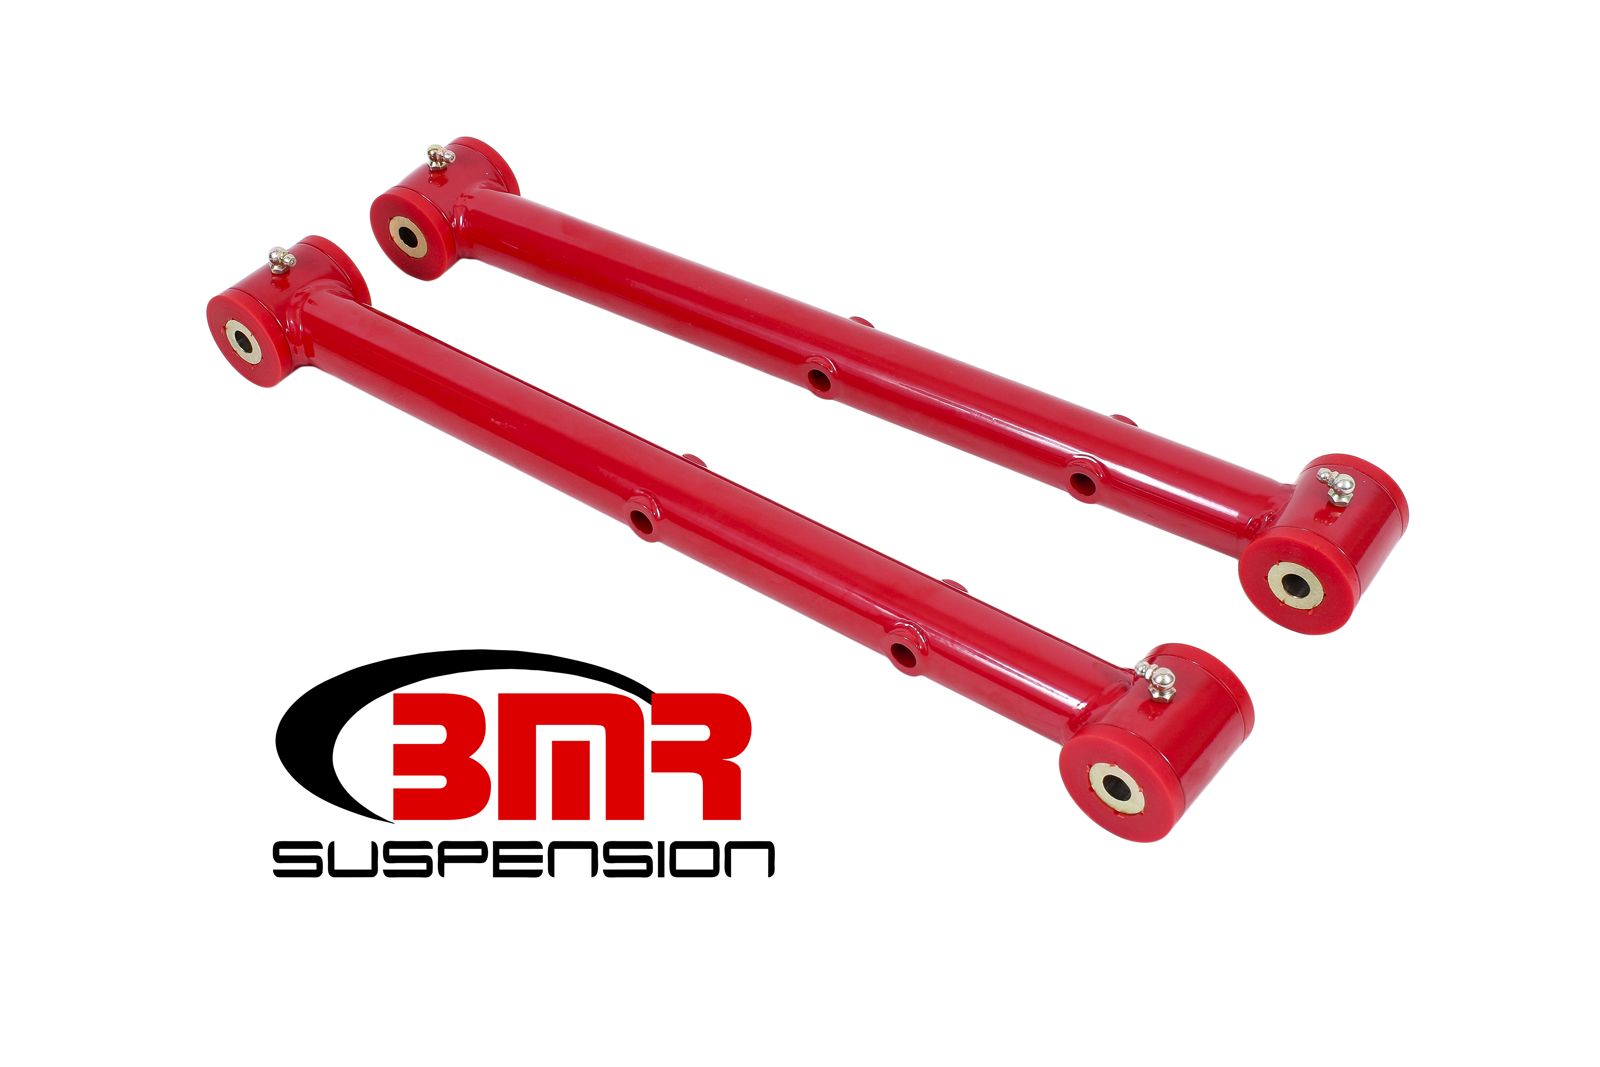 Lower Control Arms, DOM, Non-adjustable, Poly Bushings, Fits all 1978-1987 GM G-bodies, BMR Suspension - TCA039R